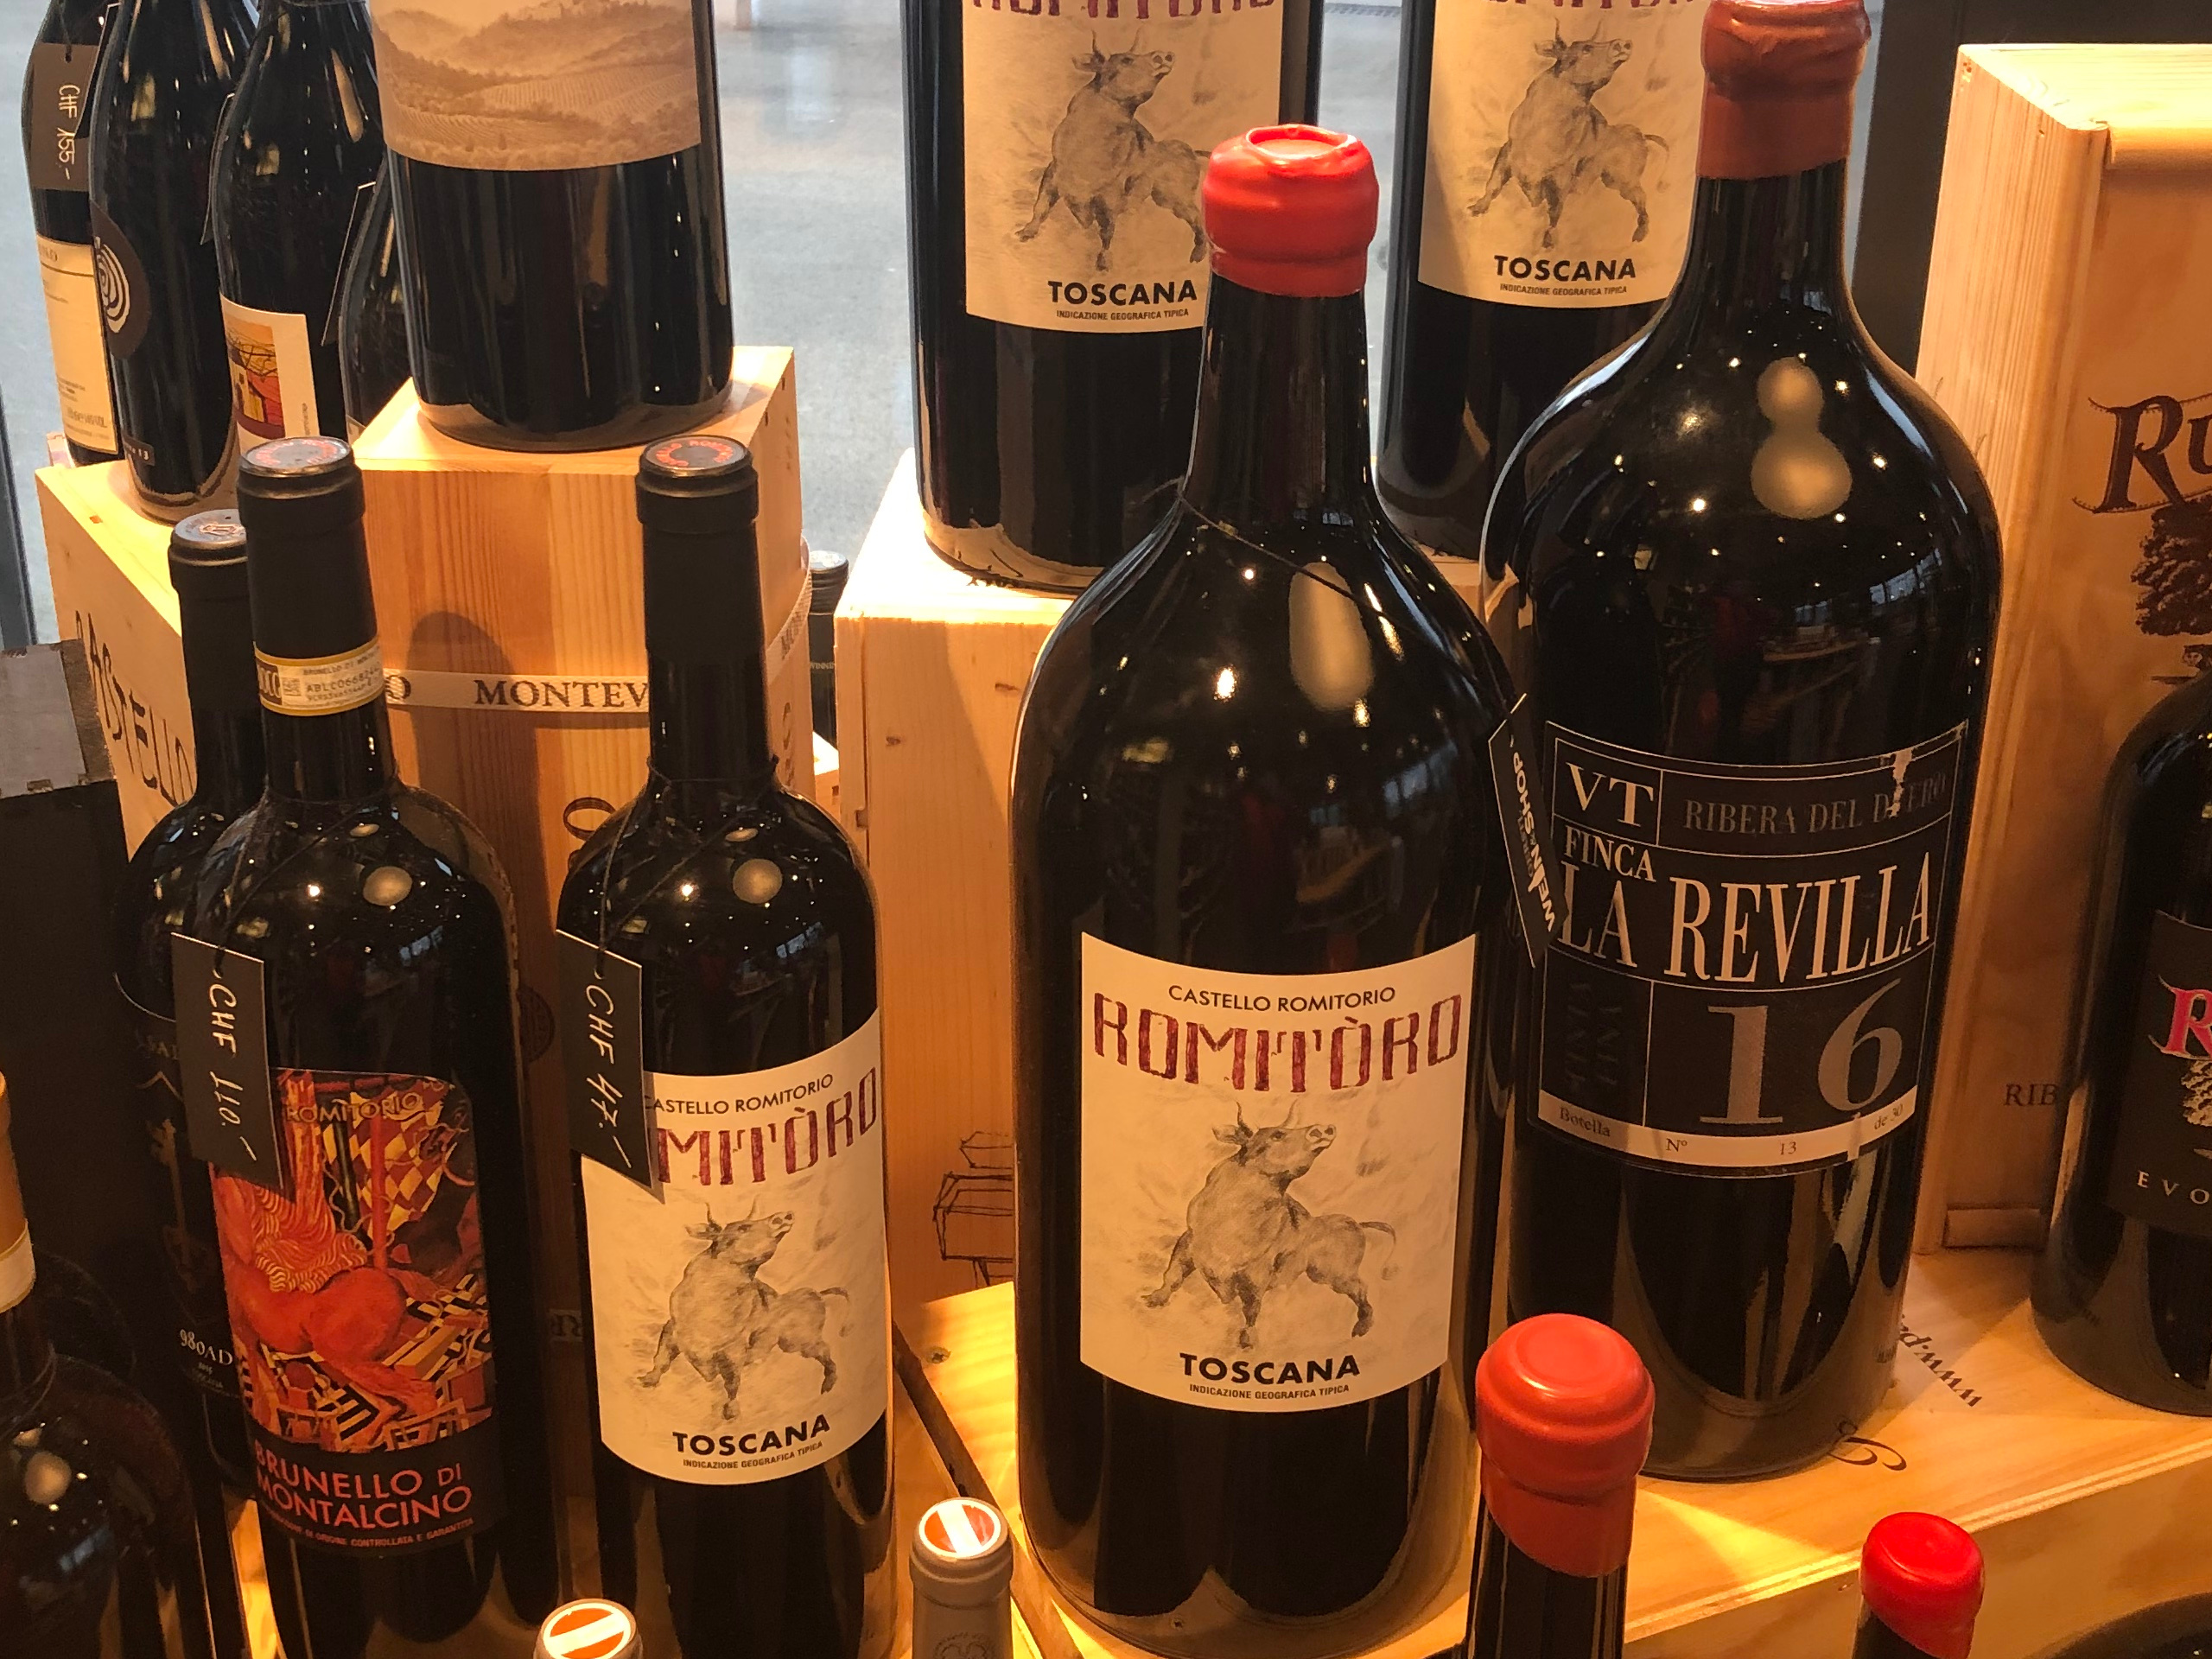 Top selection wines